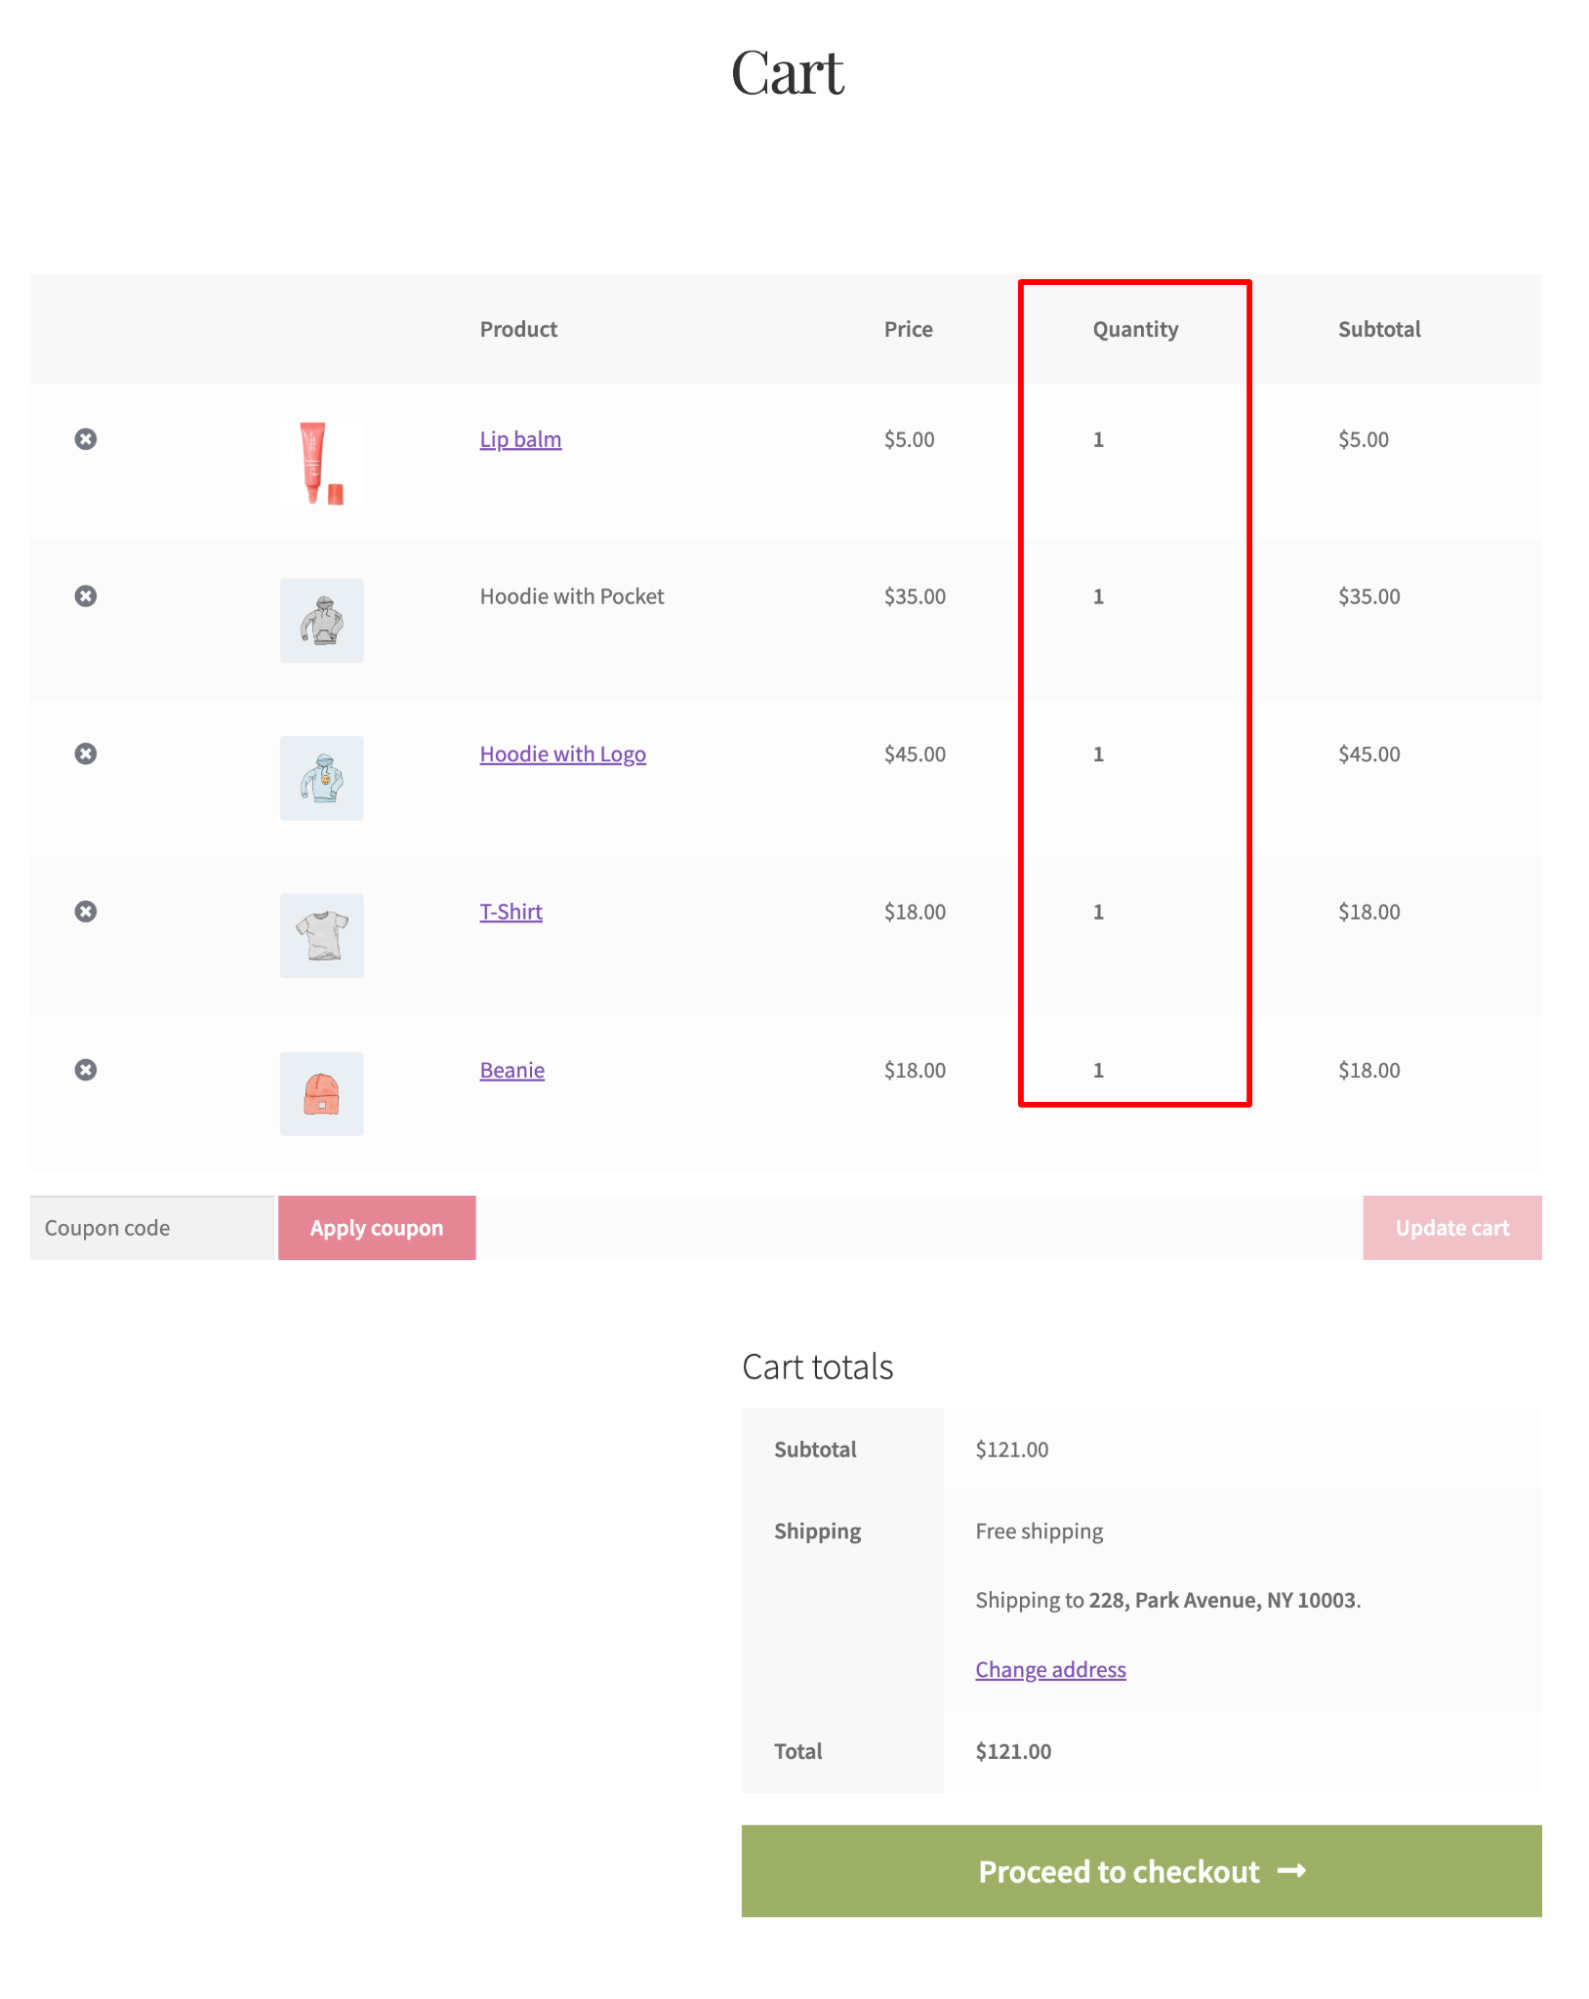 disable quanity change in cart in the cart page